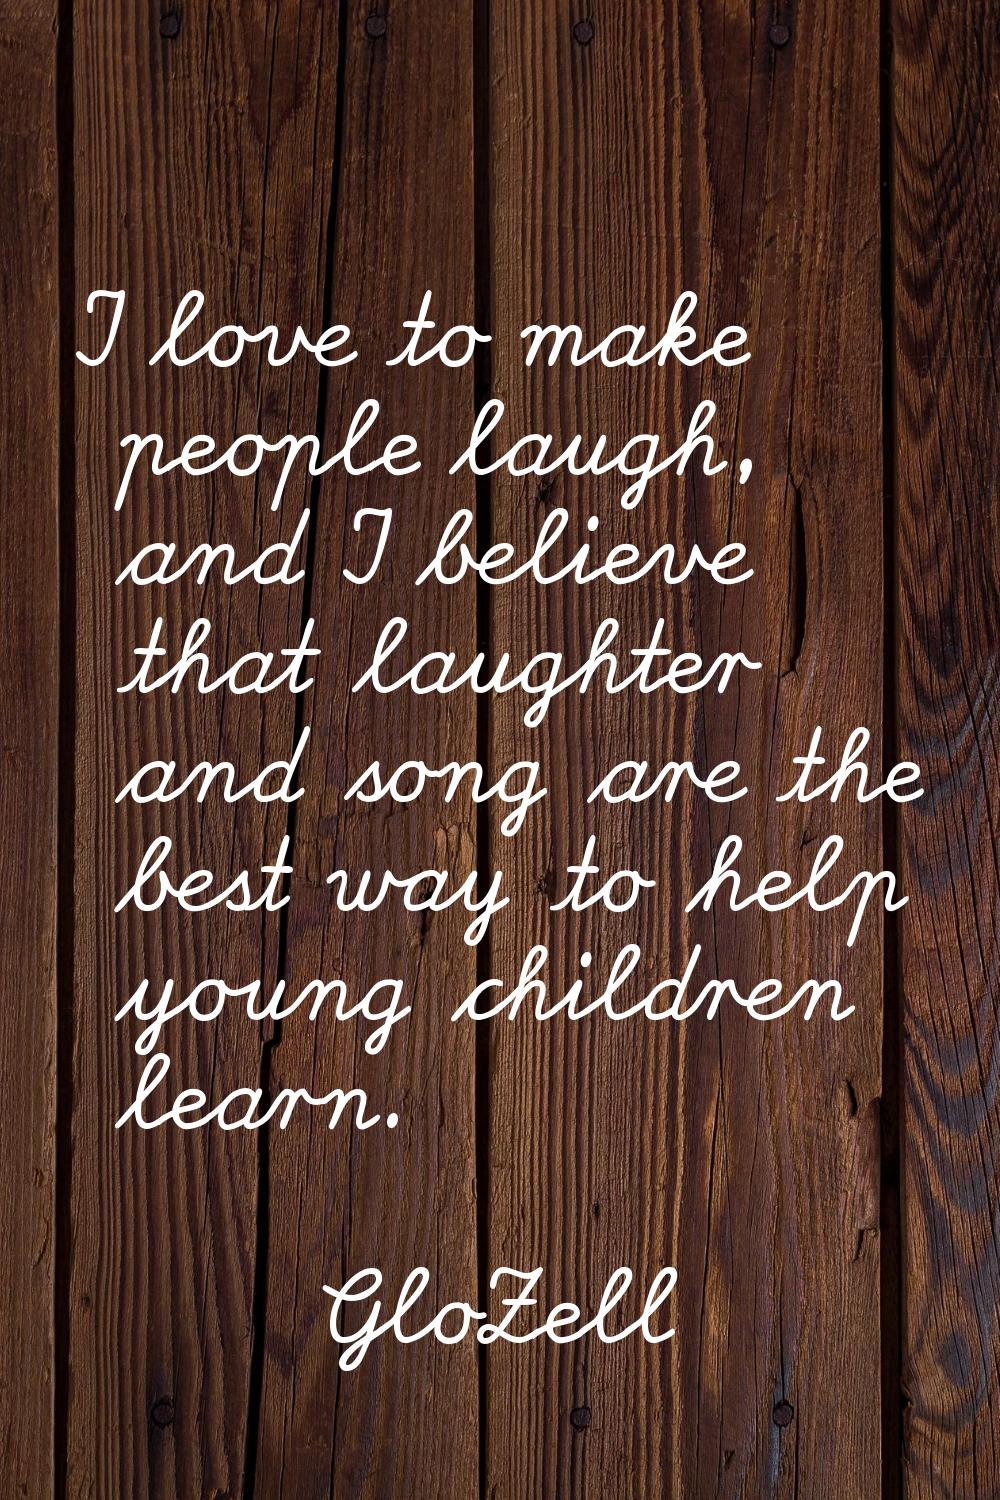 I love to make people laugh, and I believe that laughter and song are the best way to help young ch